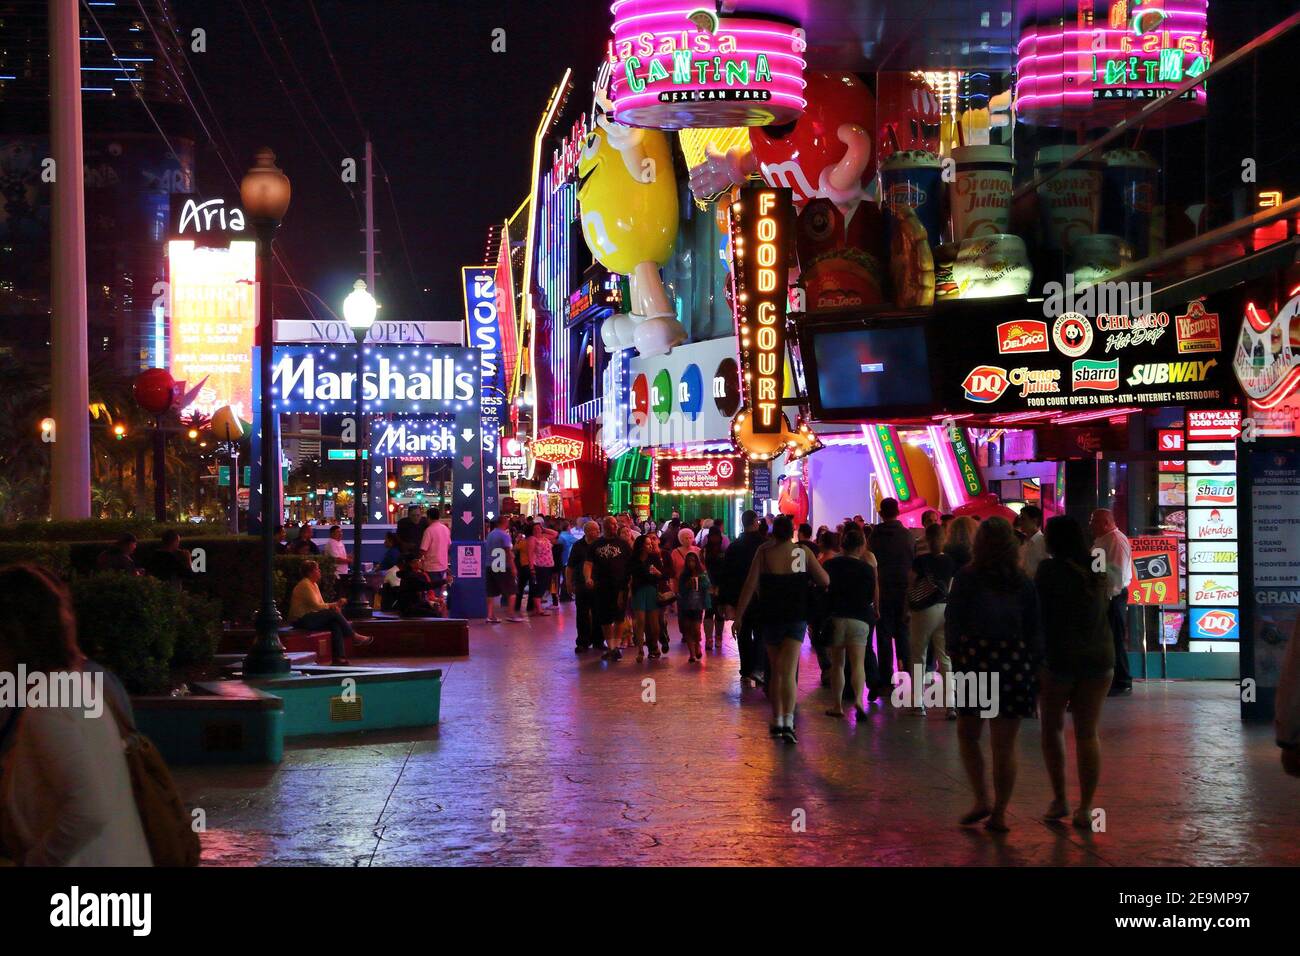 LAS VEGAS, USA - APRIL 13, 2014: People visit the famous Strip in Las Vegas. 15 of 25 largest hotels in the world are located at the strip with more t Stock Photo